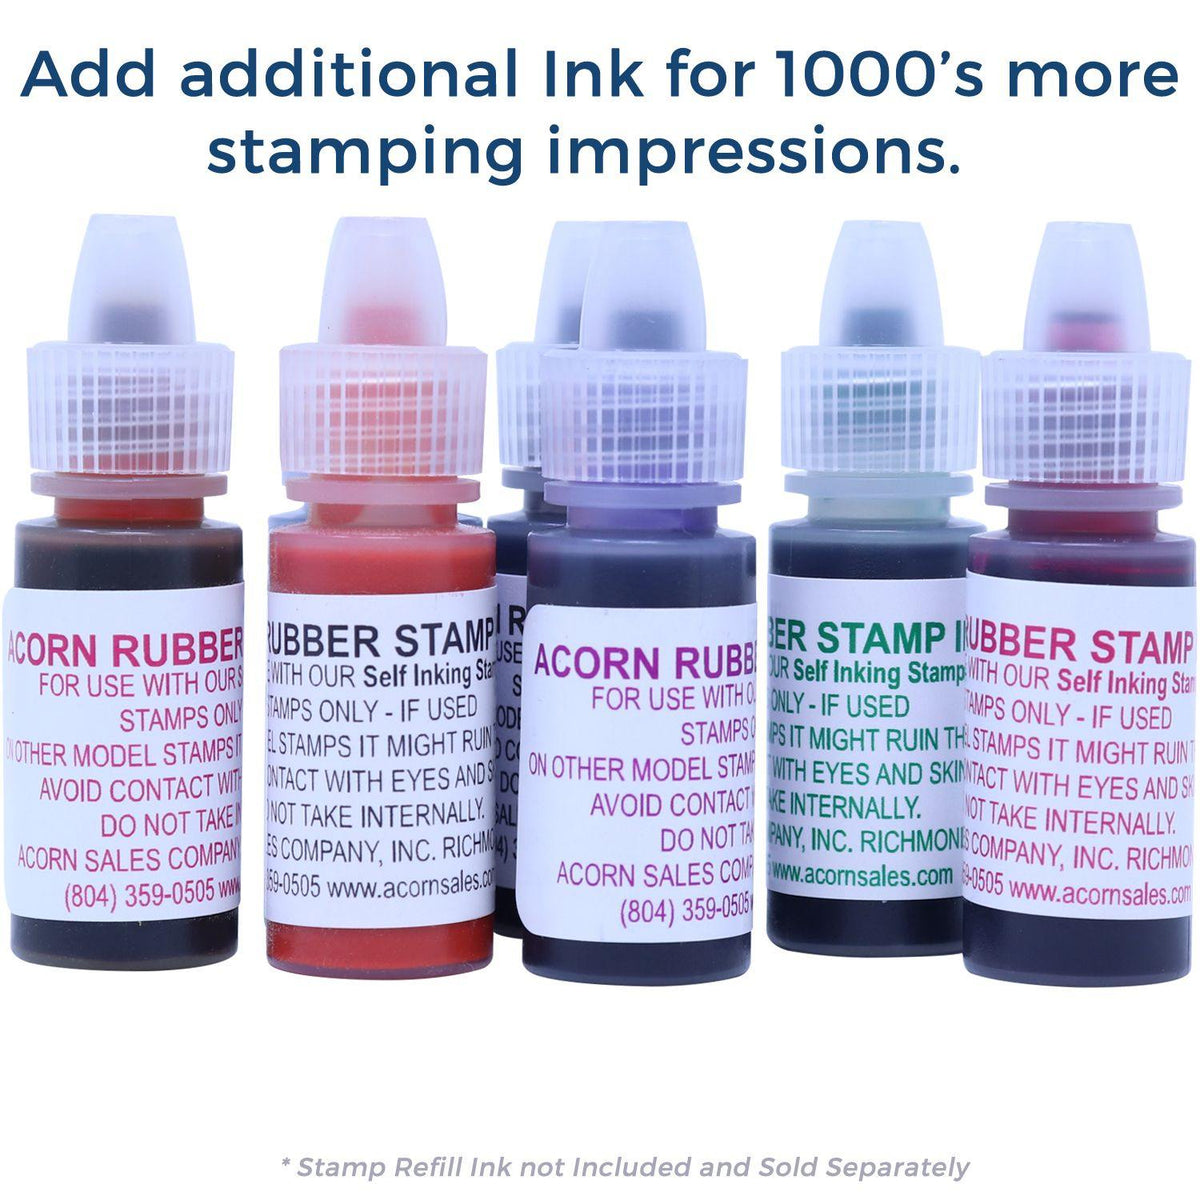 Refill Ink for Large Self Inking Attorney Client Privilege Stamp Available